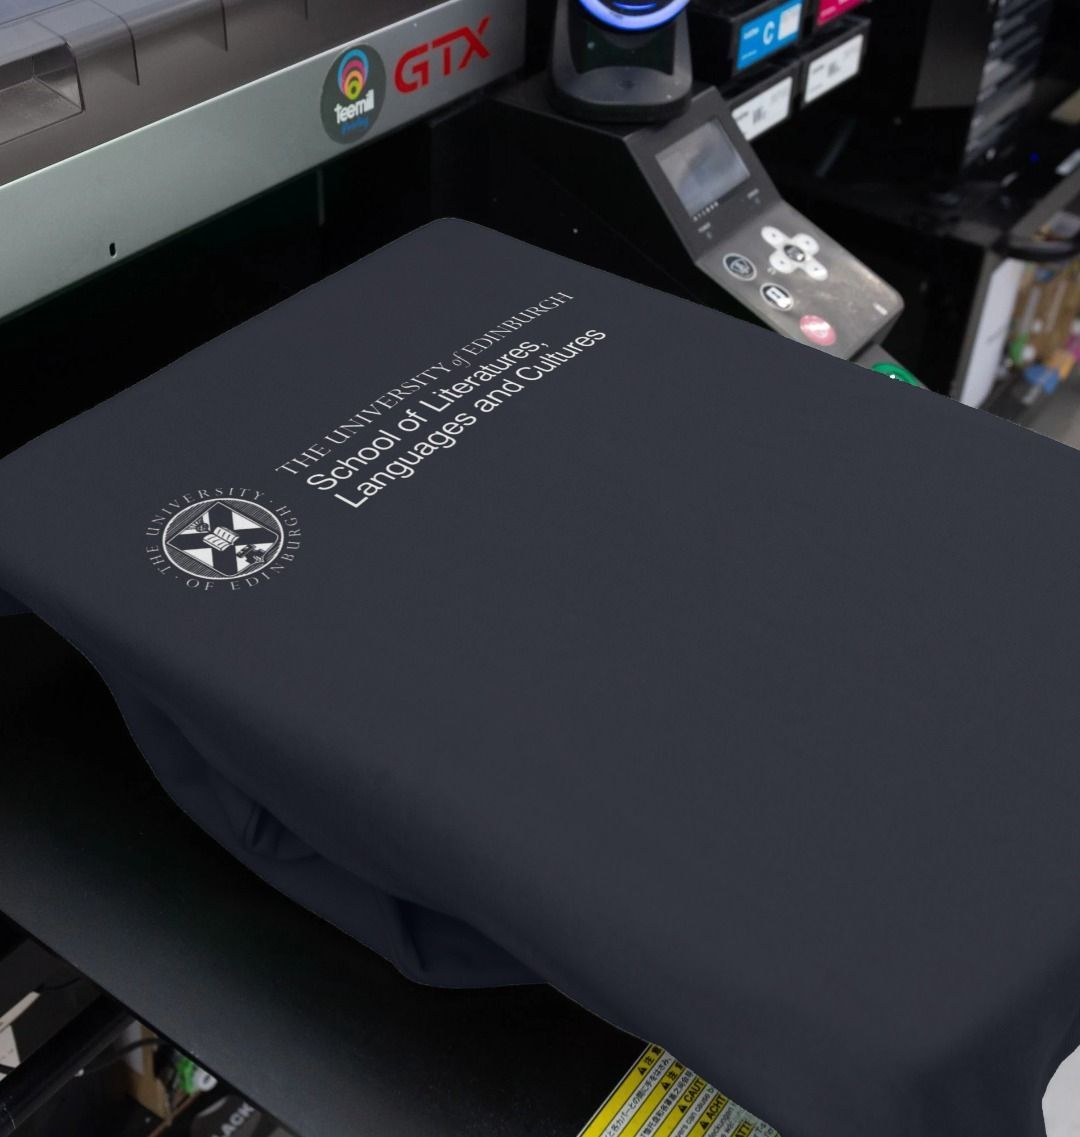 Our School of Literatures, Languages and Cultures Sweatshirt being printed by our print on demand partner, teemill.